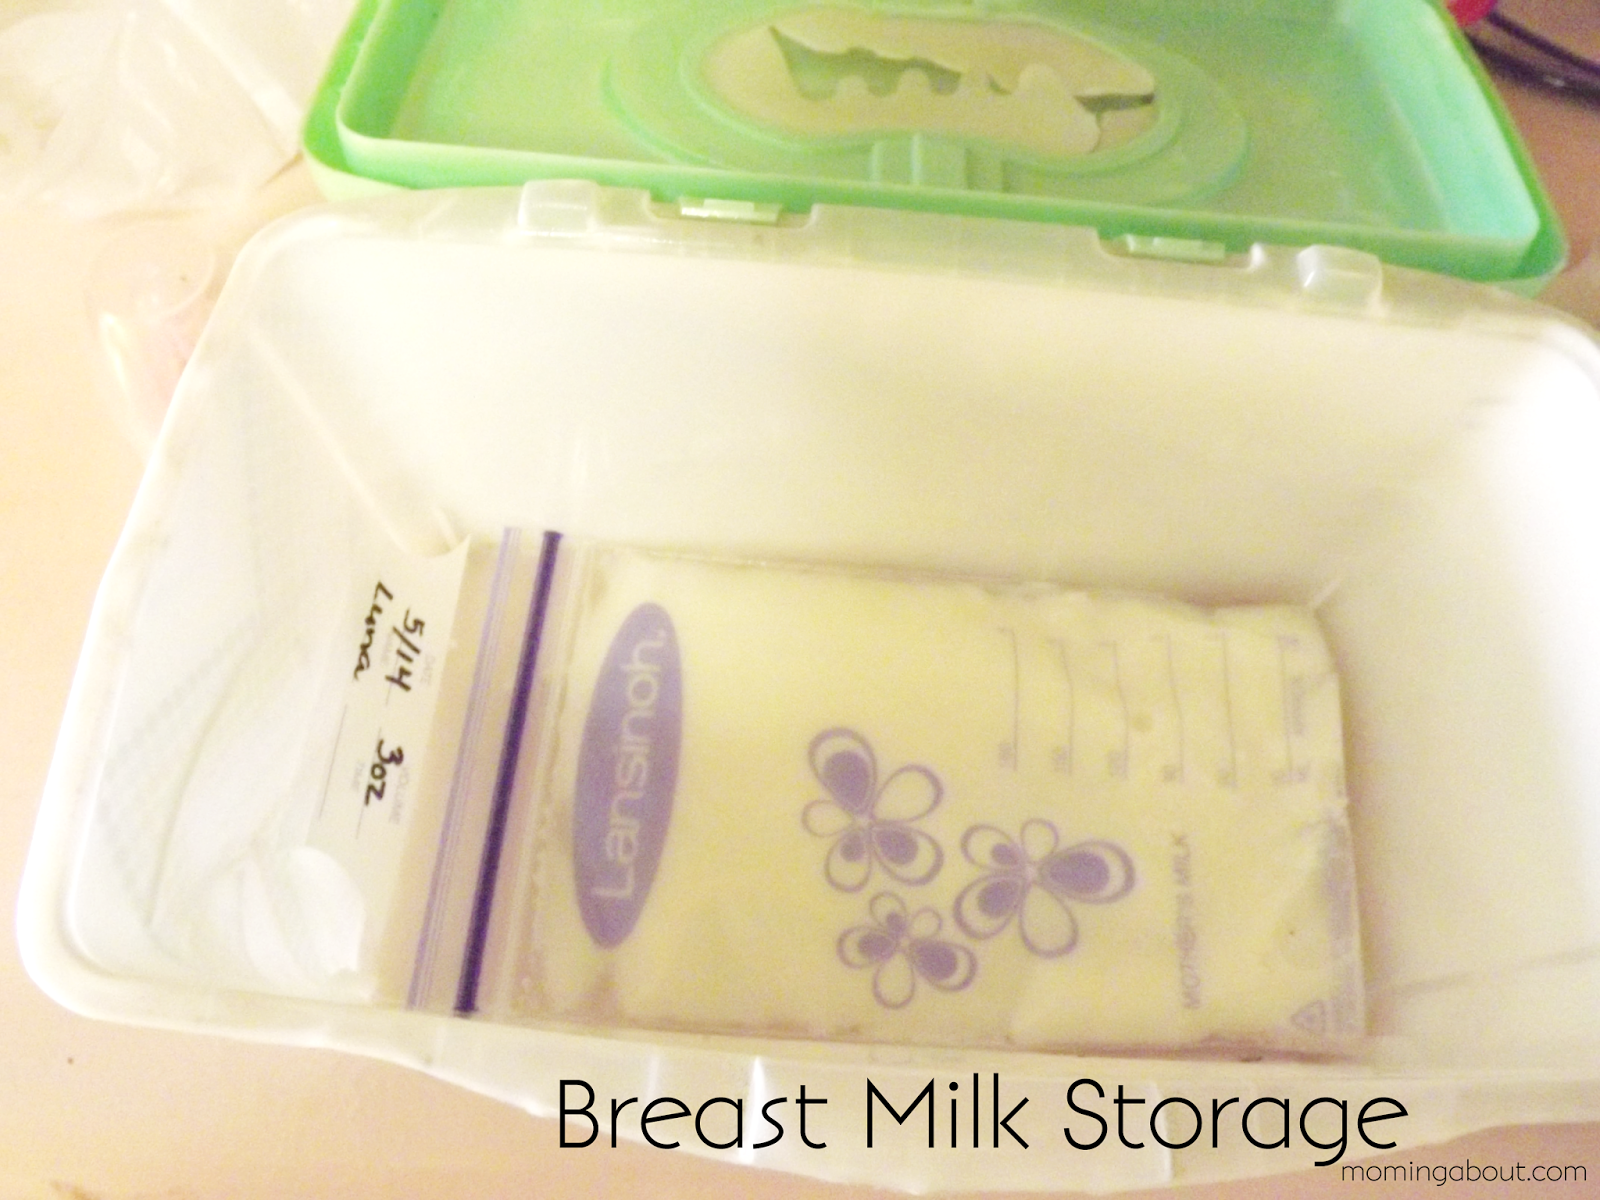 Breastmilk Store in Wipes Container